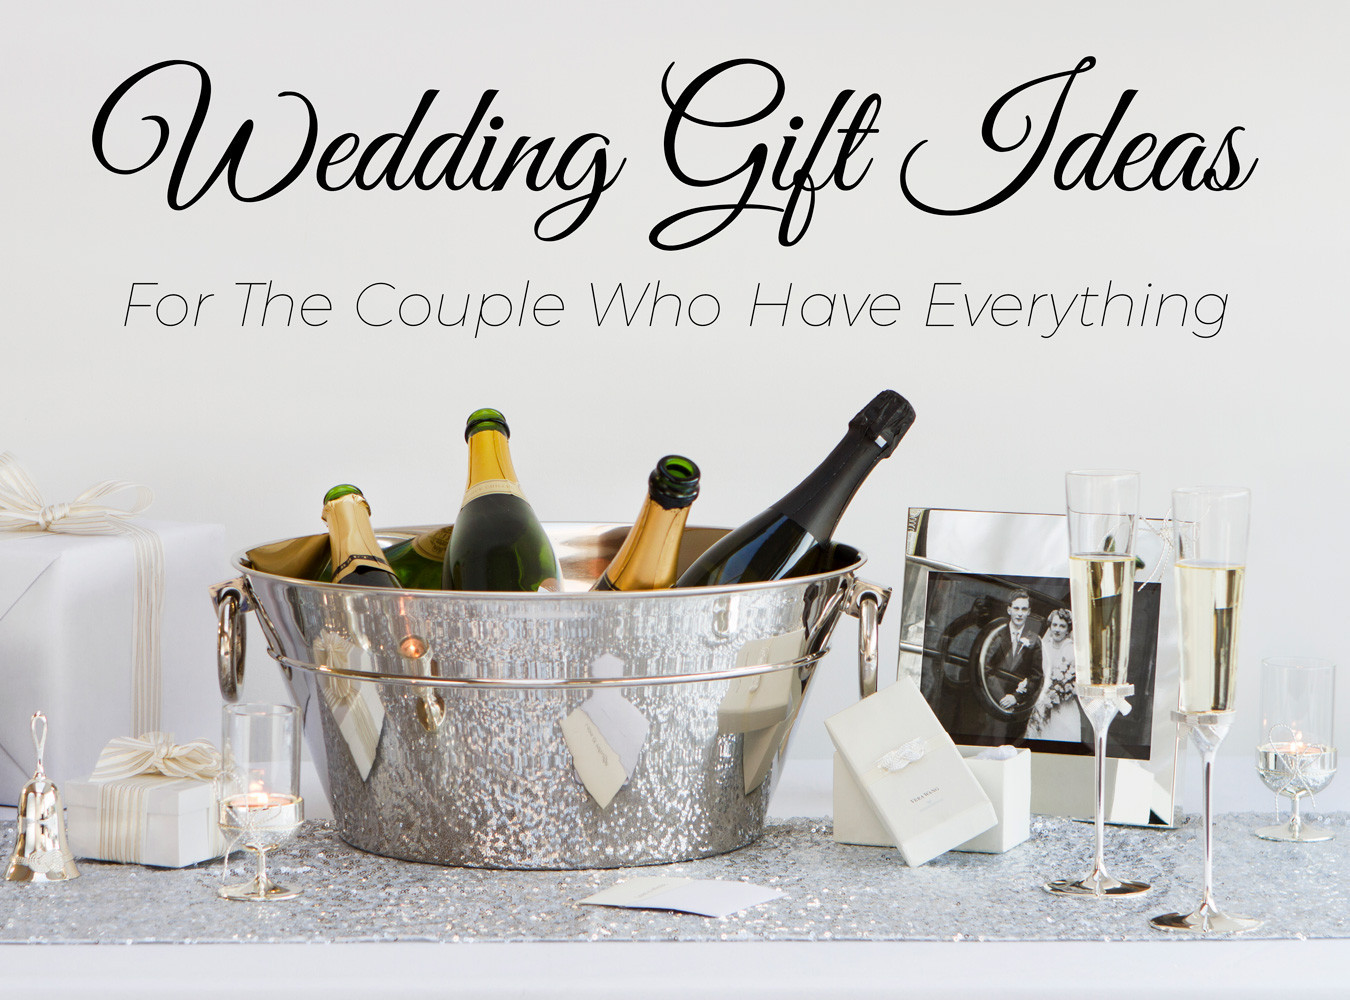 Wedding Gift Ideas For Older Couple
 Top 20 Wedding Gift Ideas for Older Couples Second